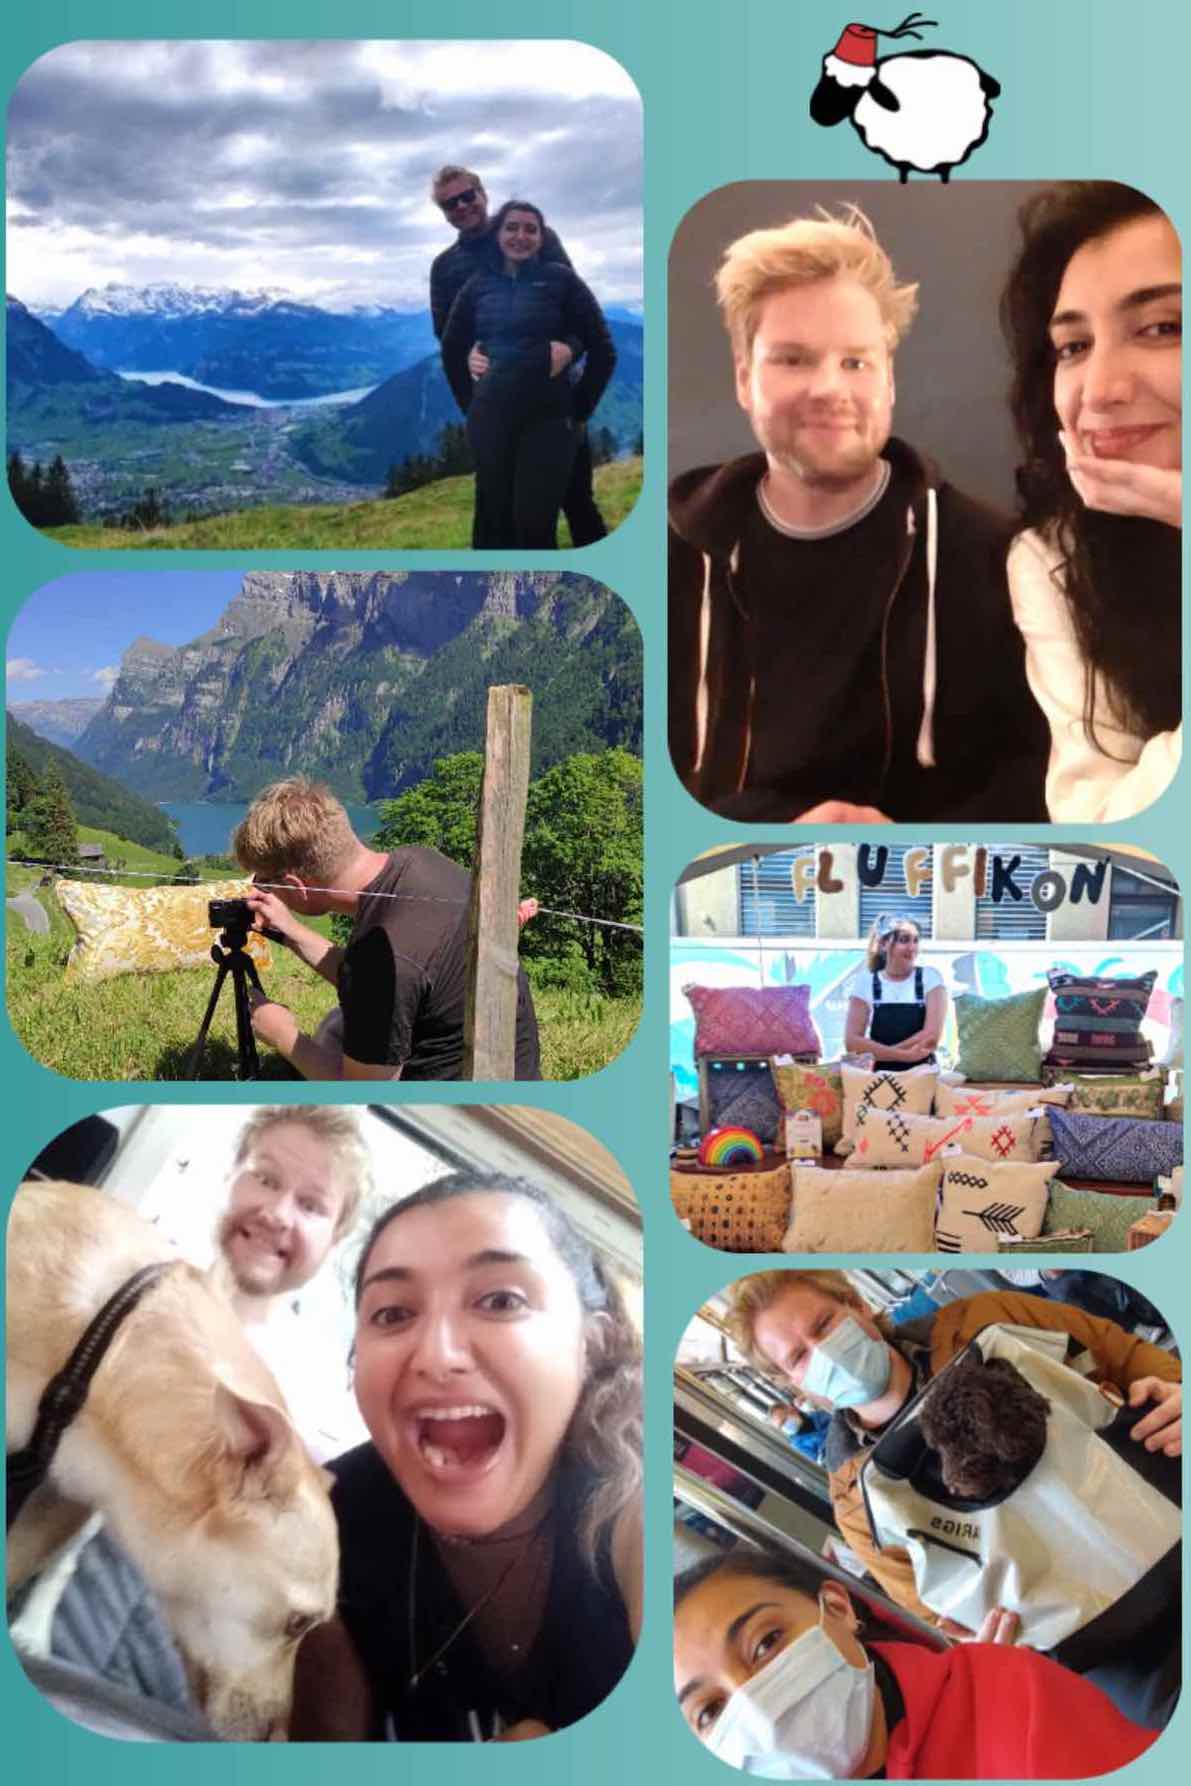 Collage with multiple pictures of the Fluffikon founders.